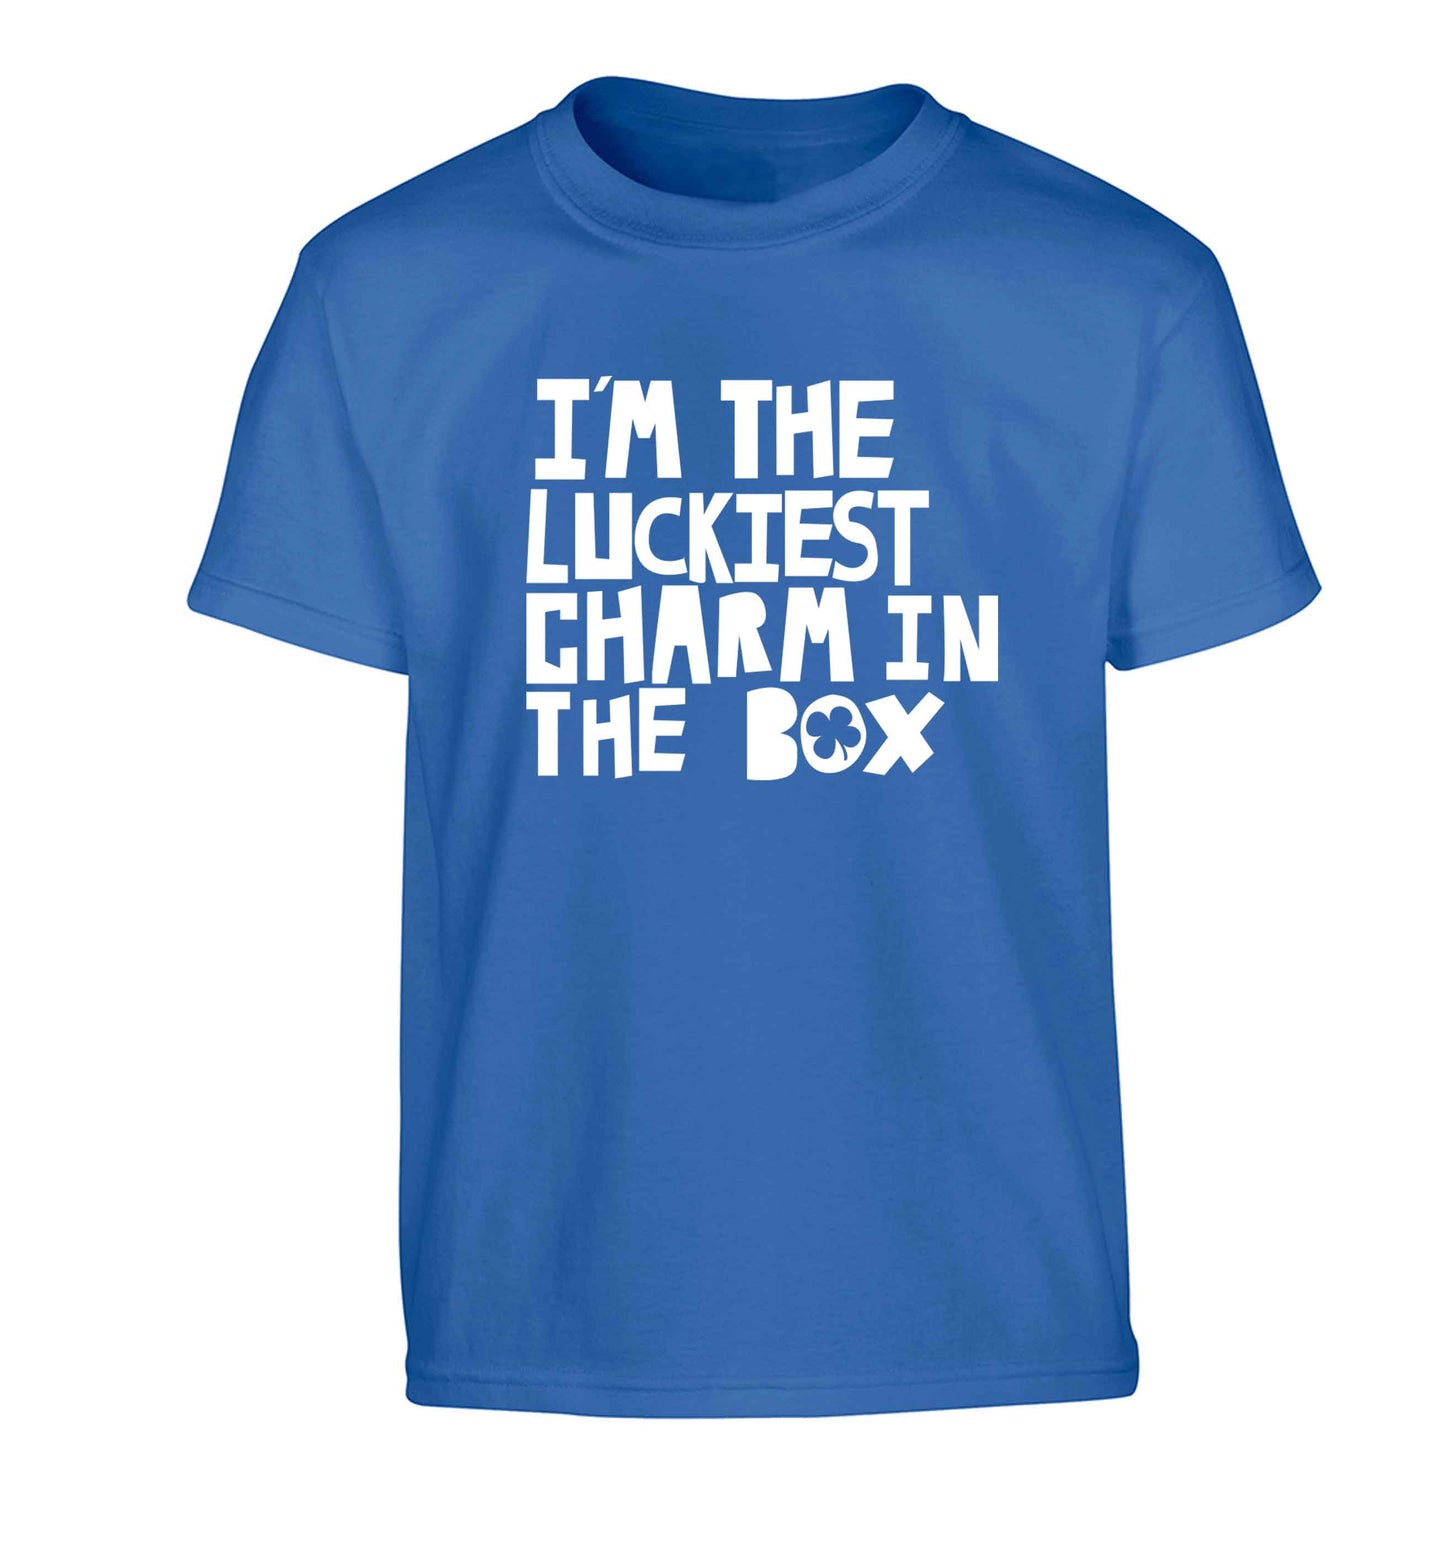 I'm the luckiest charm in the box Children's blue Tshirt 12-13 Years